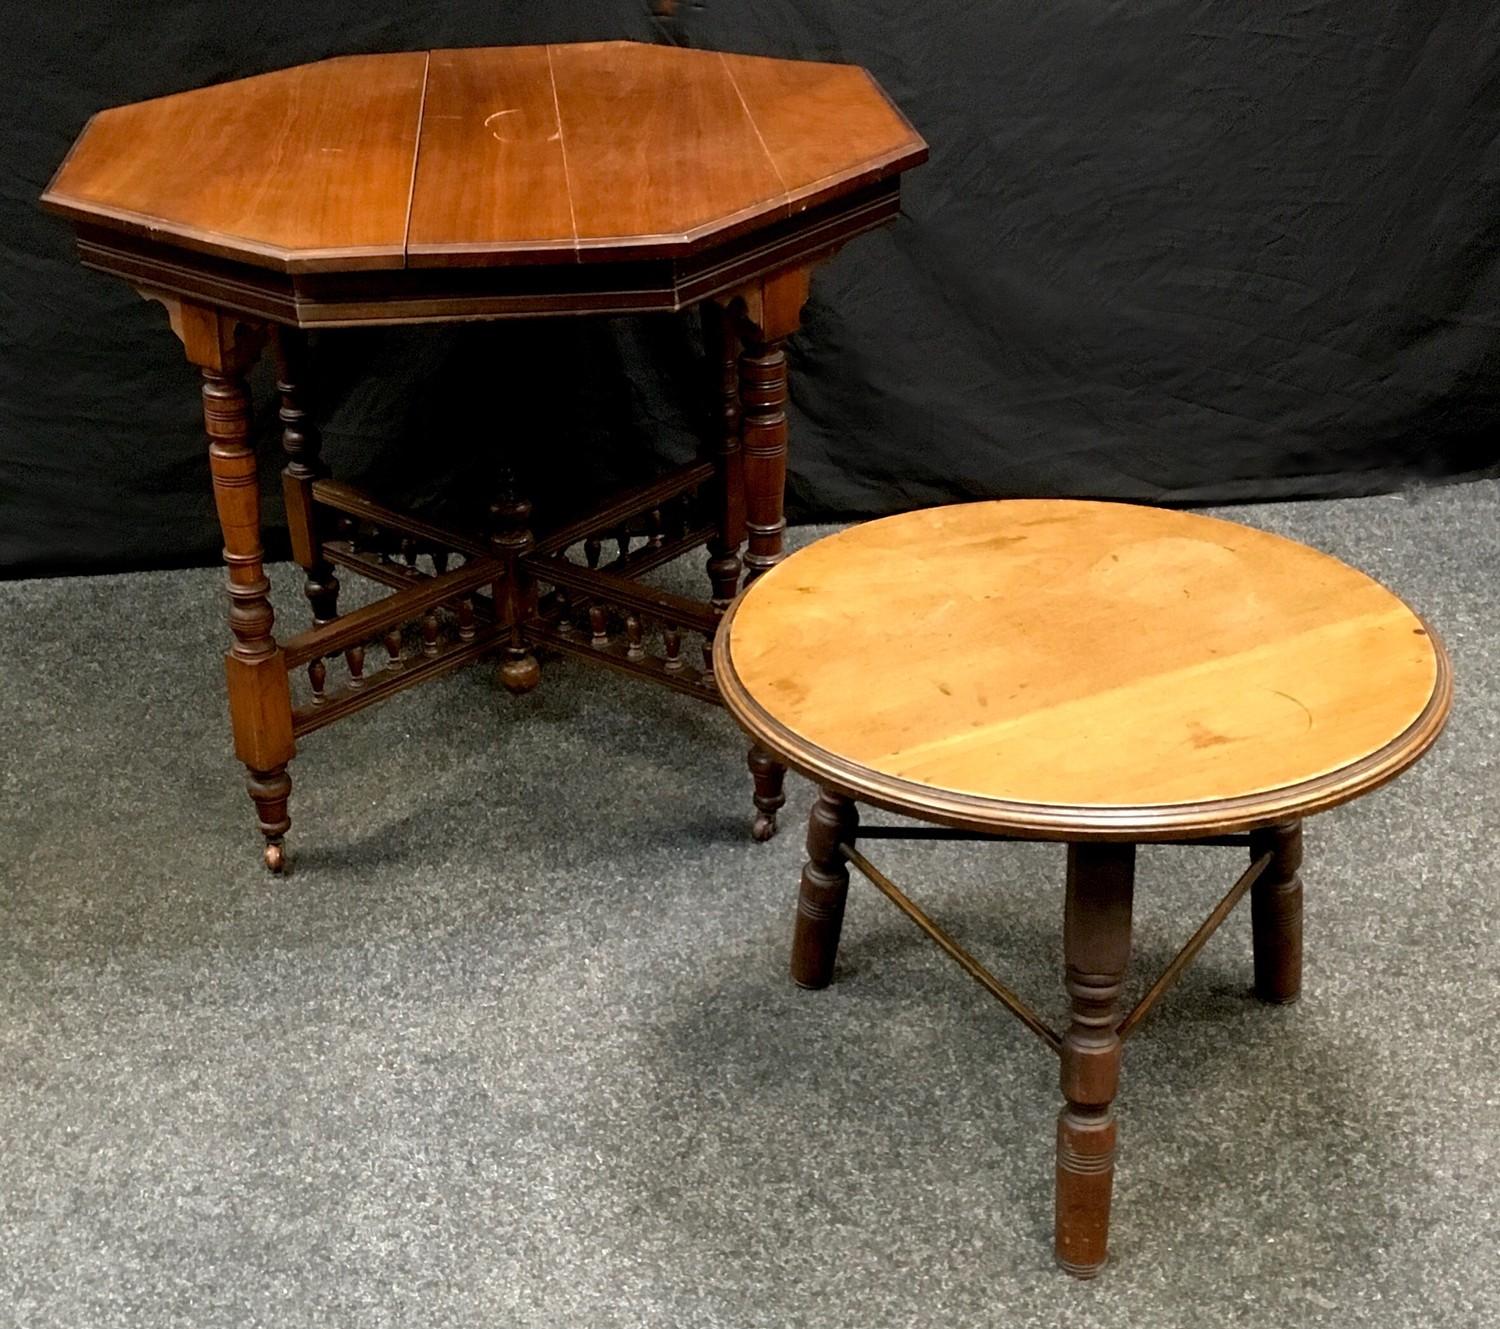 A Victorian mahogany occasional table, octagonal top, turned supports and underfinials, spindles X-